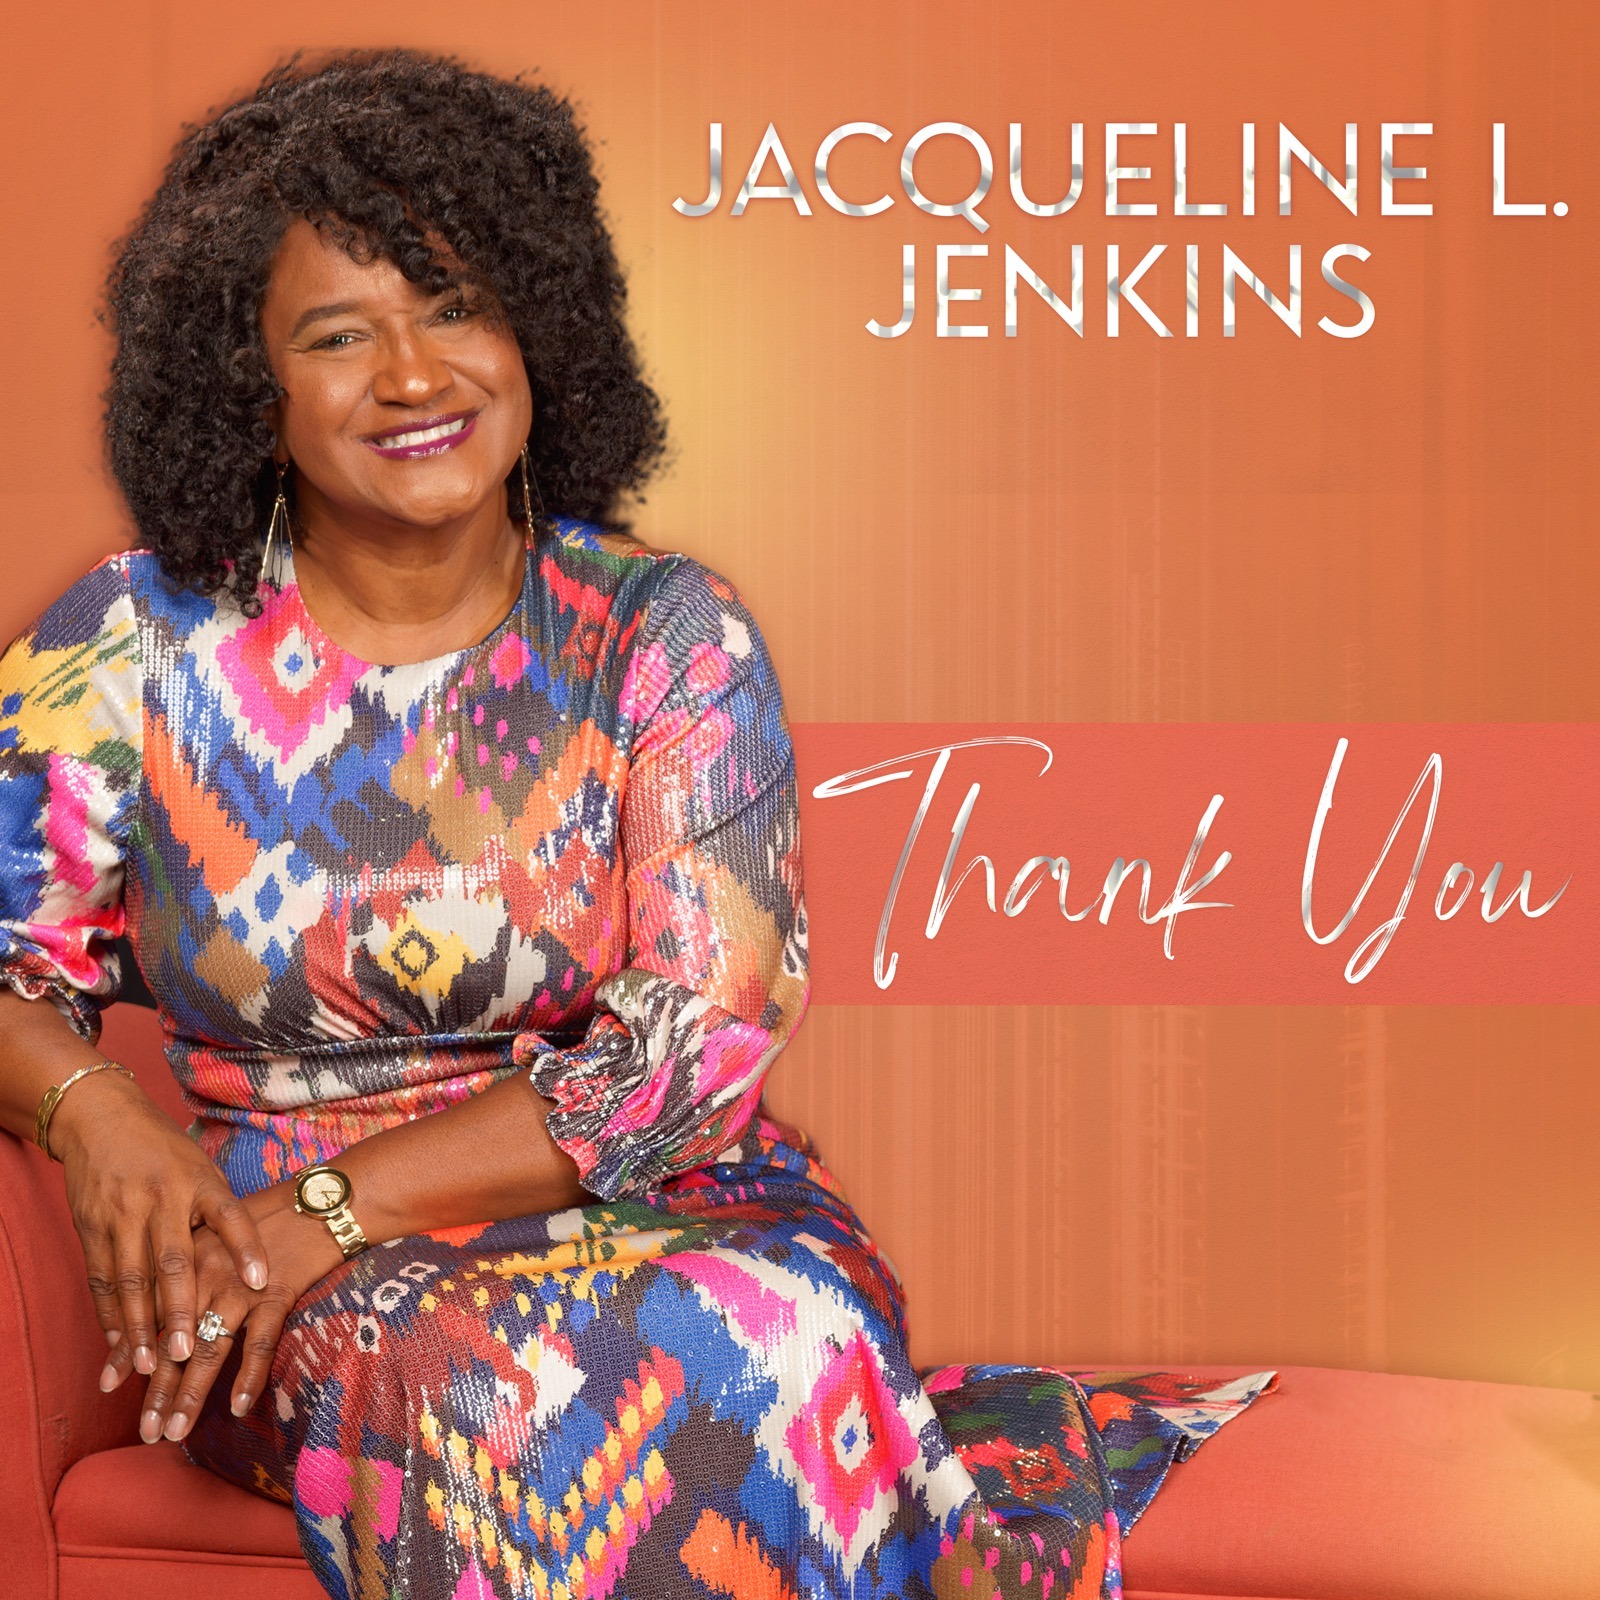 A New Voice in Gospel Proclaims “Thank You” to the World – Jacqueline L. Jenkins Amazes with Soulful New Music